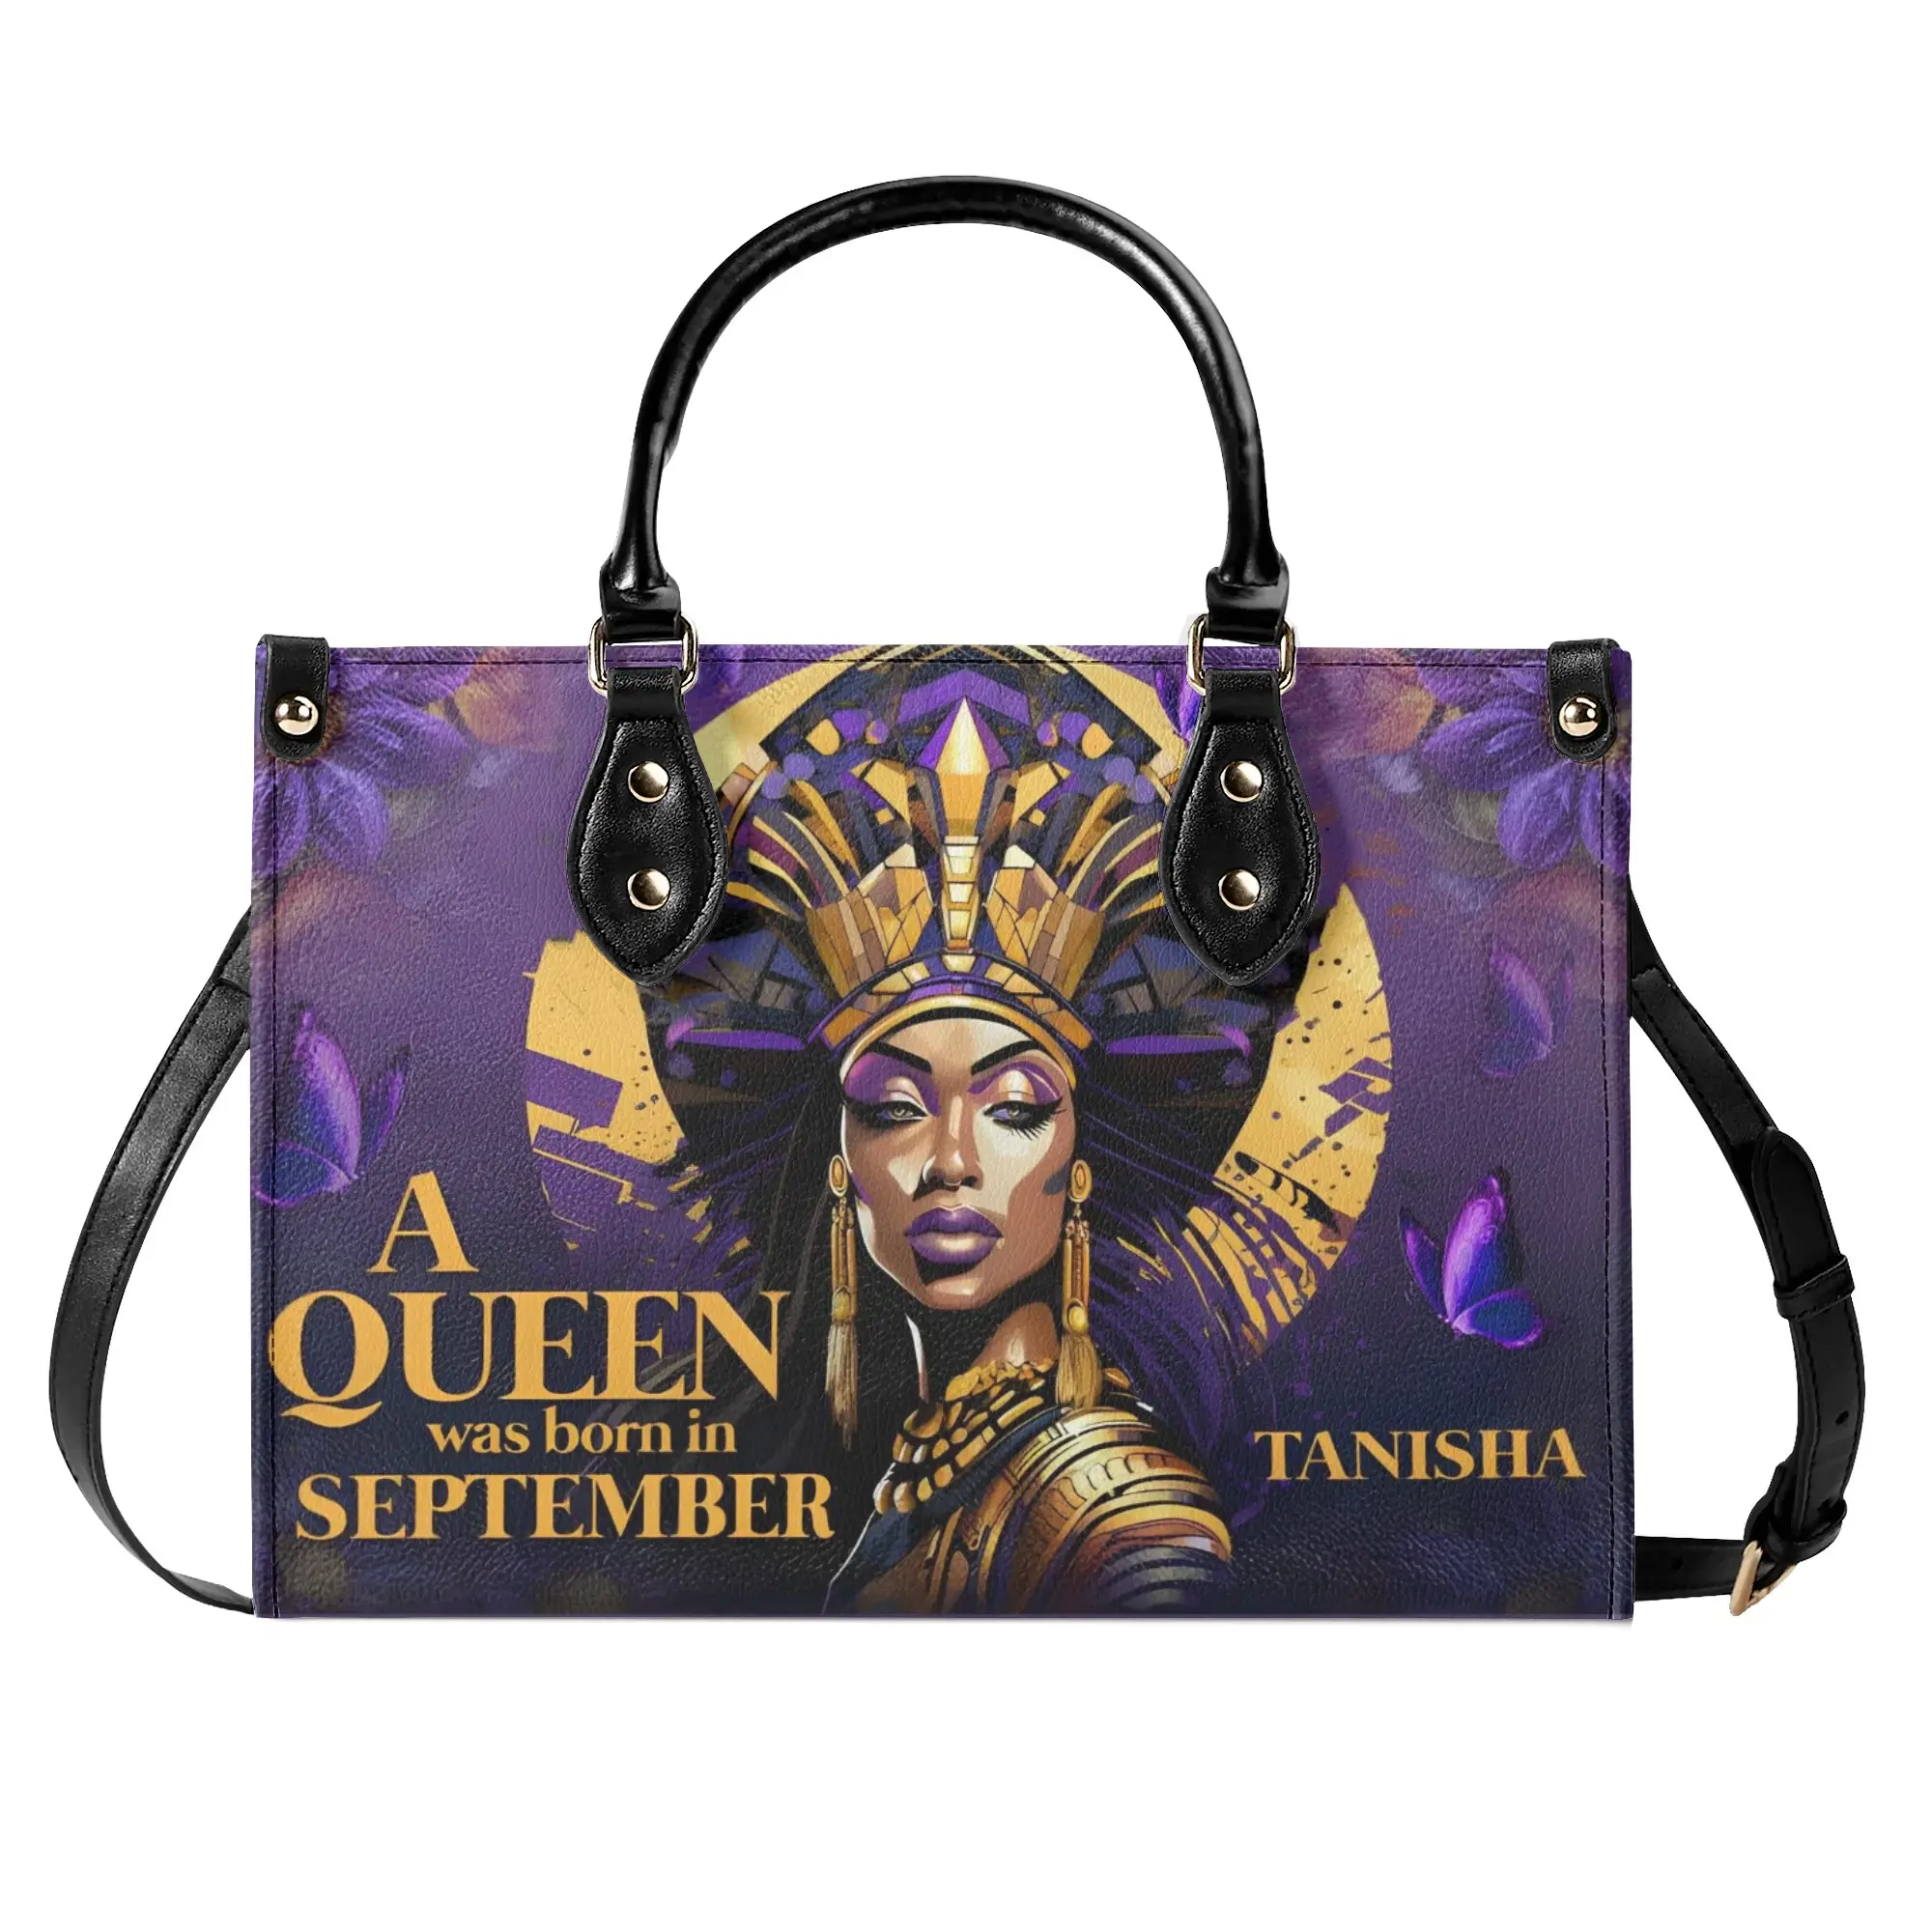 Personalized Leather Handbag A Beautiful Queen